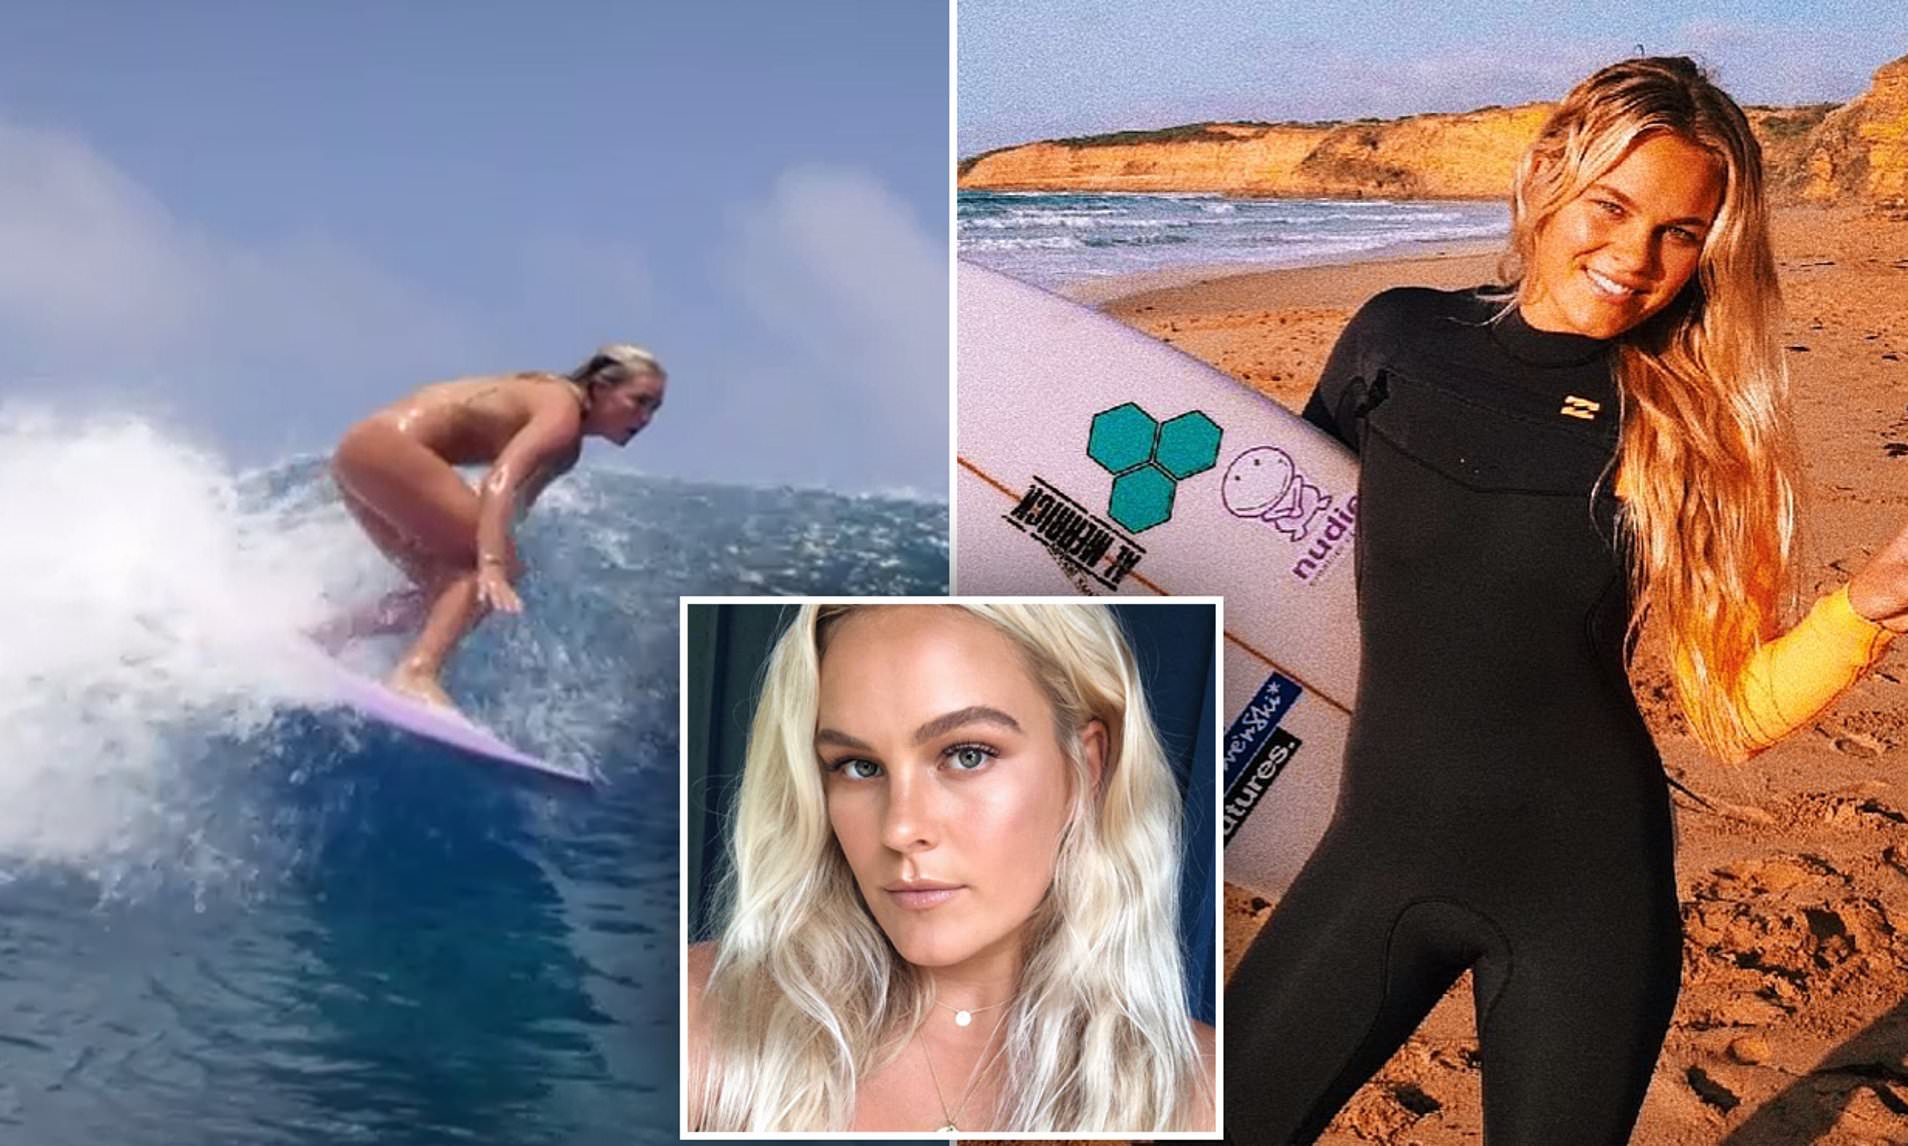 birds rock recommends Women Naked Surfing